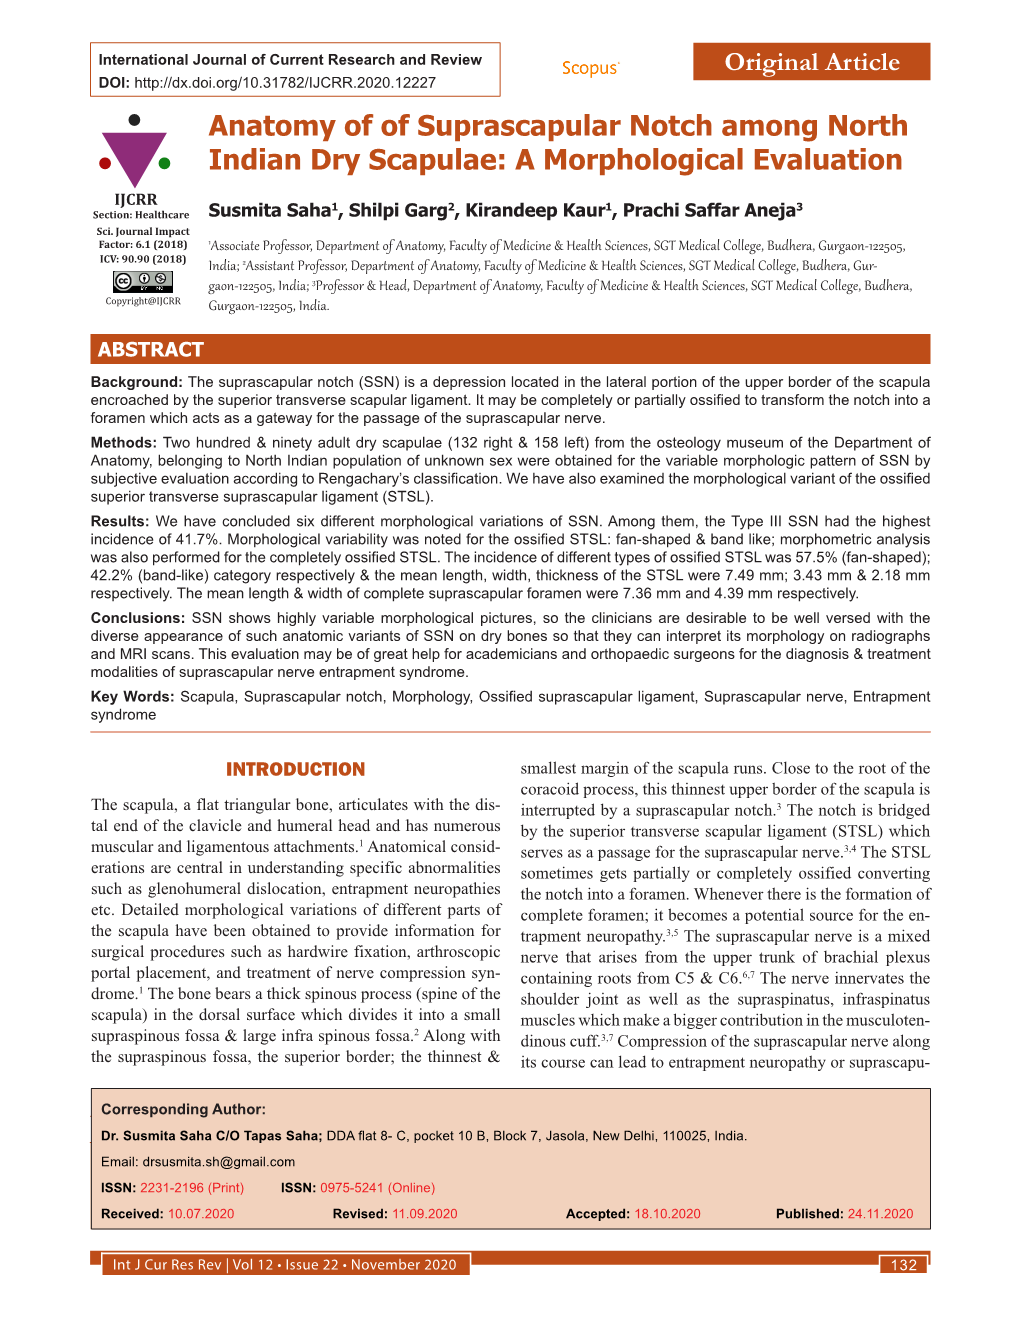 Anatomy of of Suprascapular Notch Among North Indian Dry Scapulae: a Morphological Evaluation